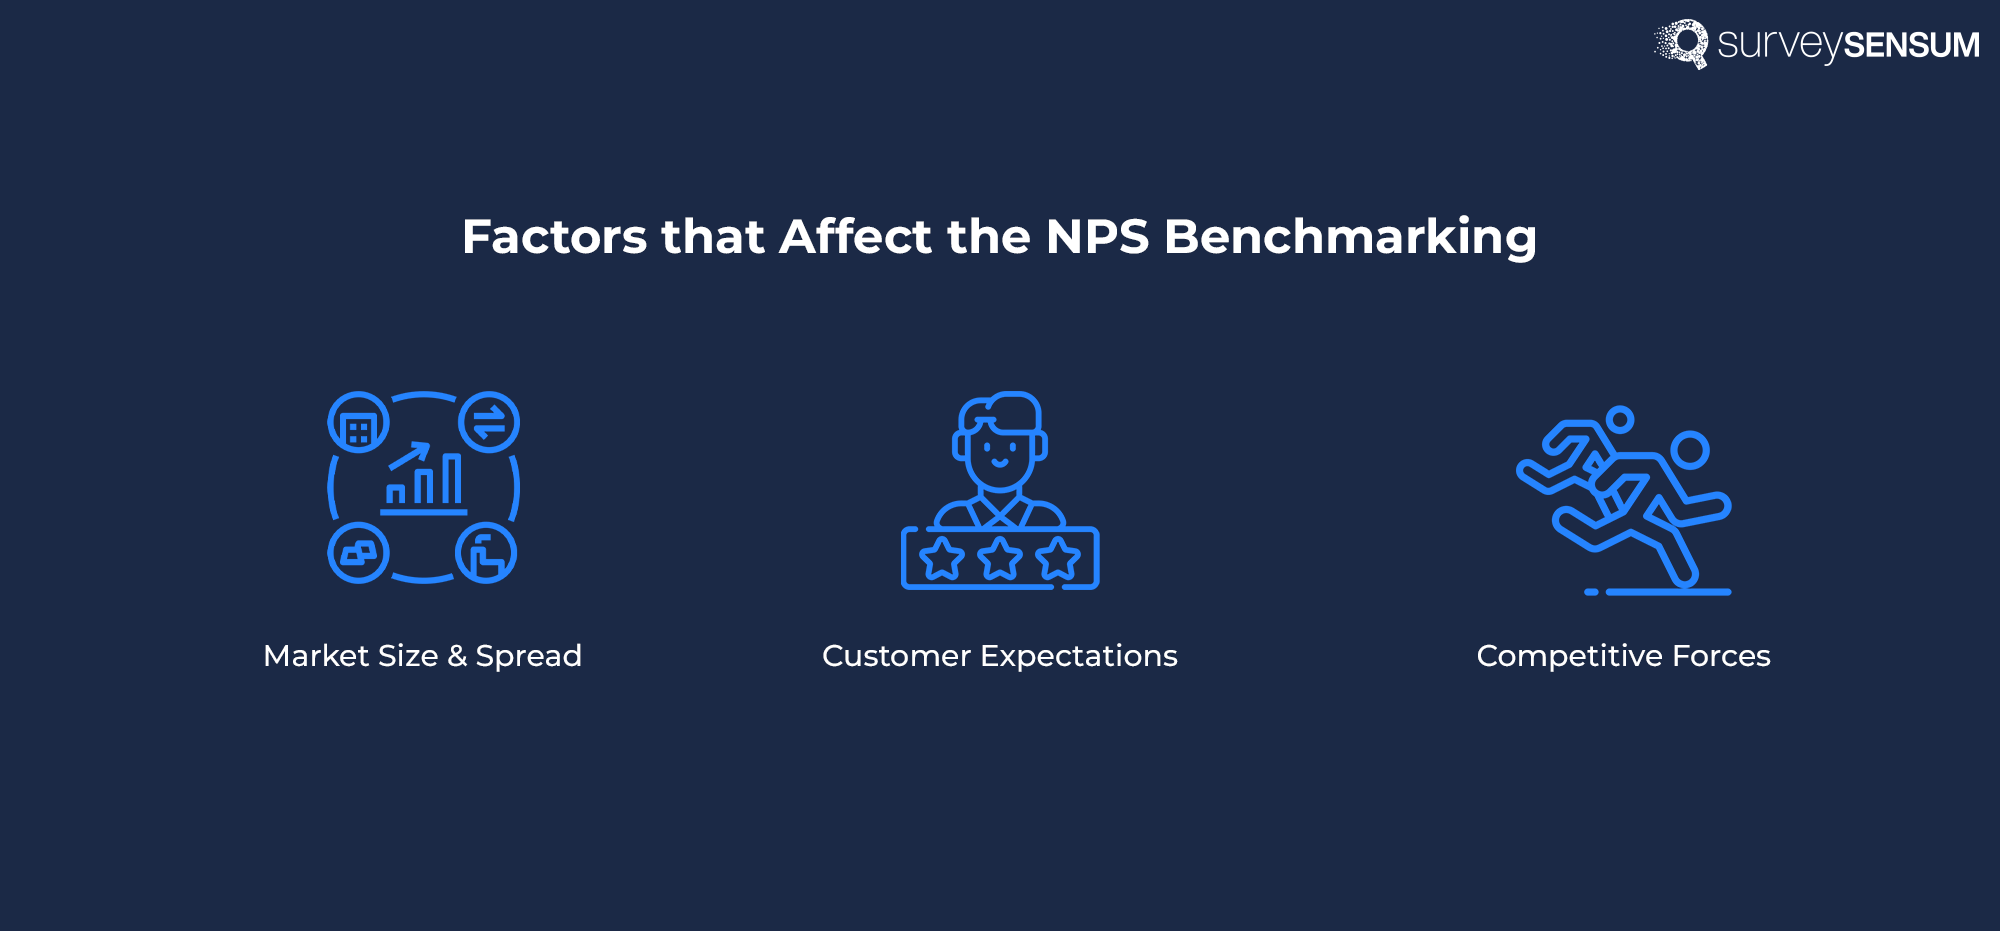 The image shows all the factors affecting NPS benchmarking like market size, customer expectations, and competitive forces.